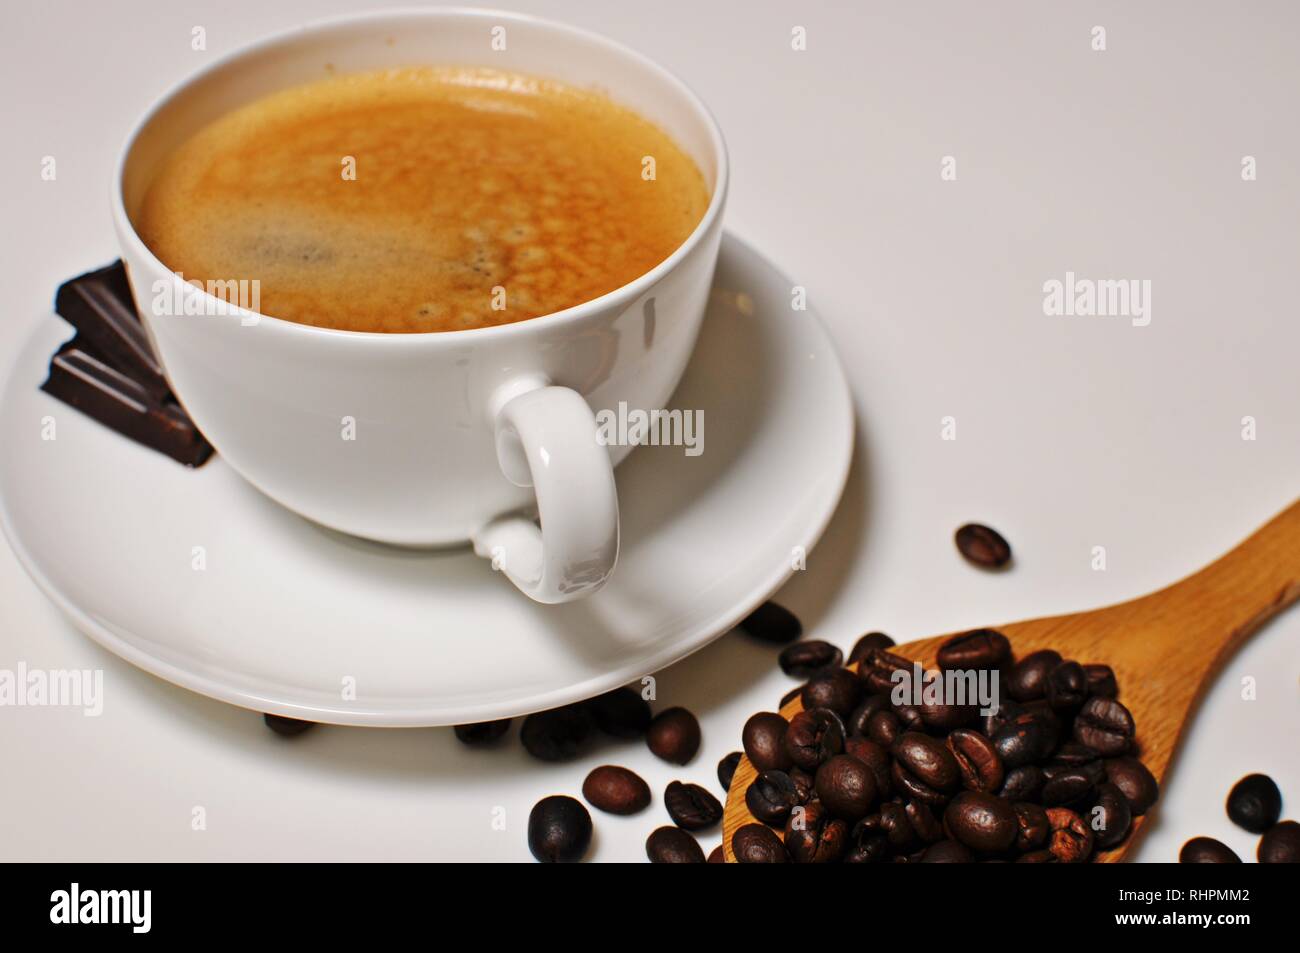 Hot cup of coffee with chocolate and roasted beans as decoration. Stock Photo